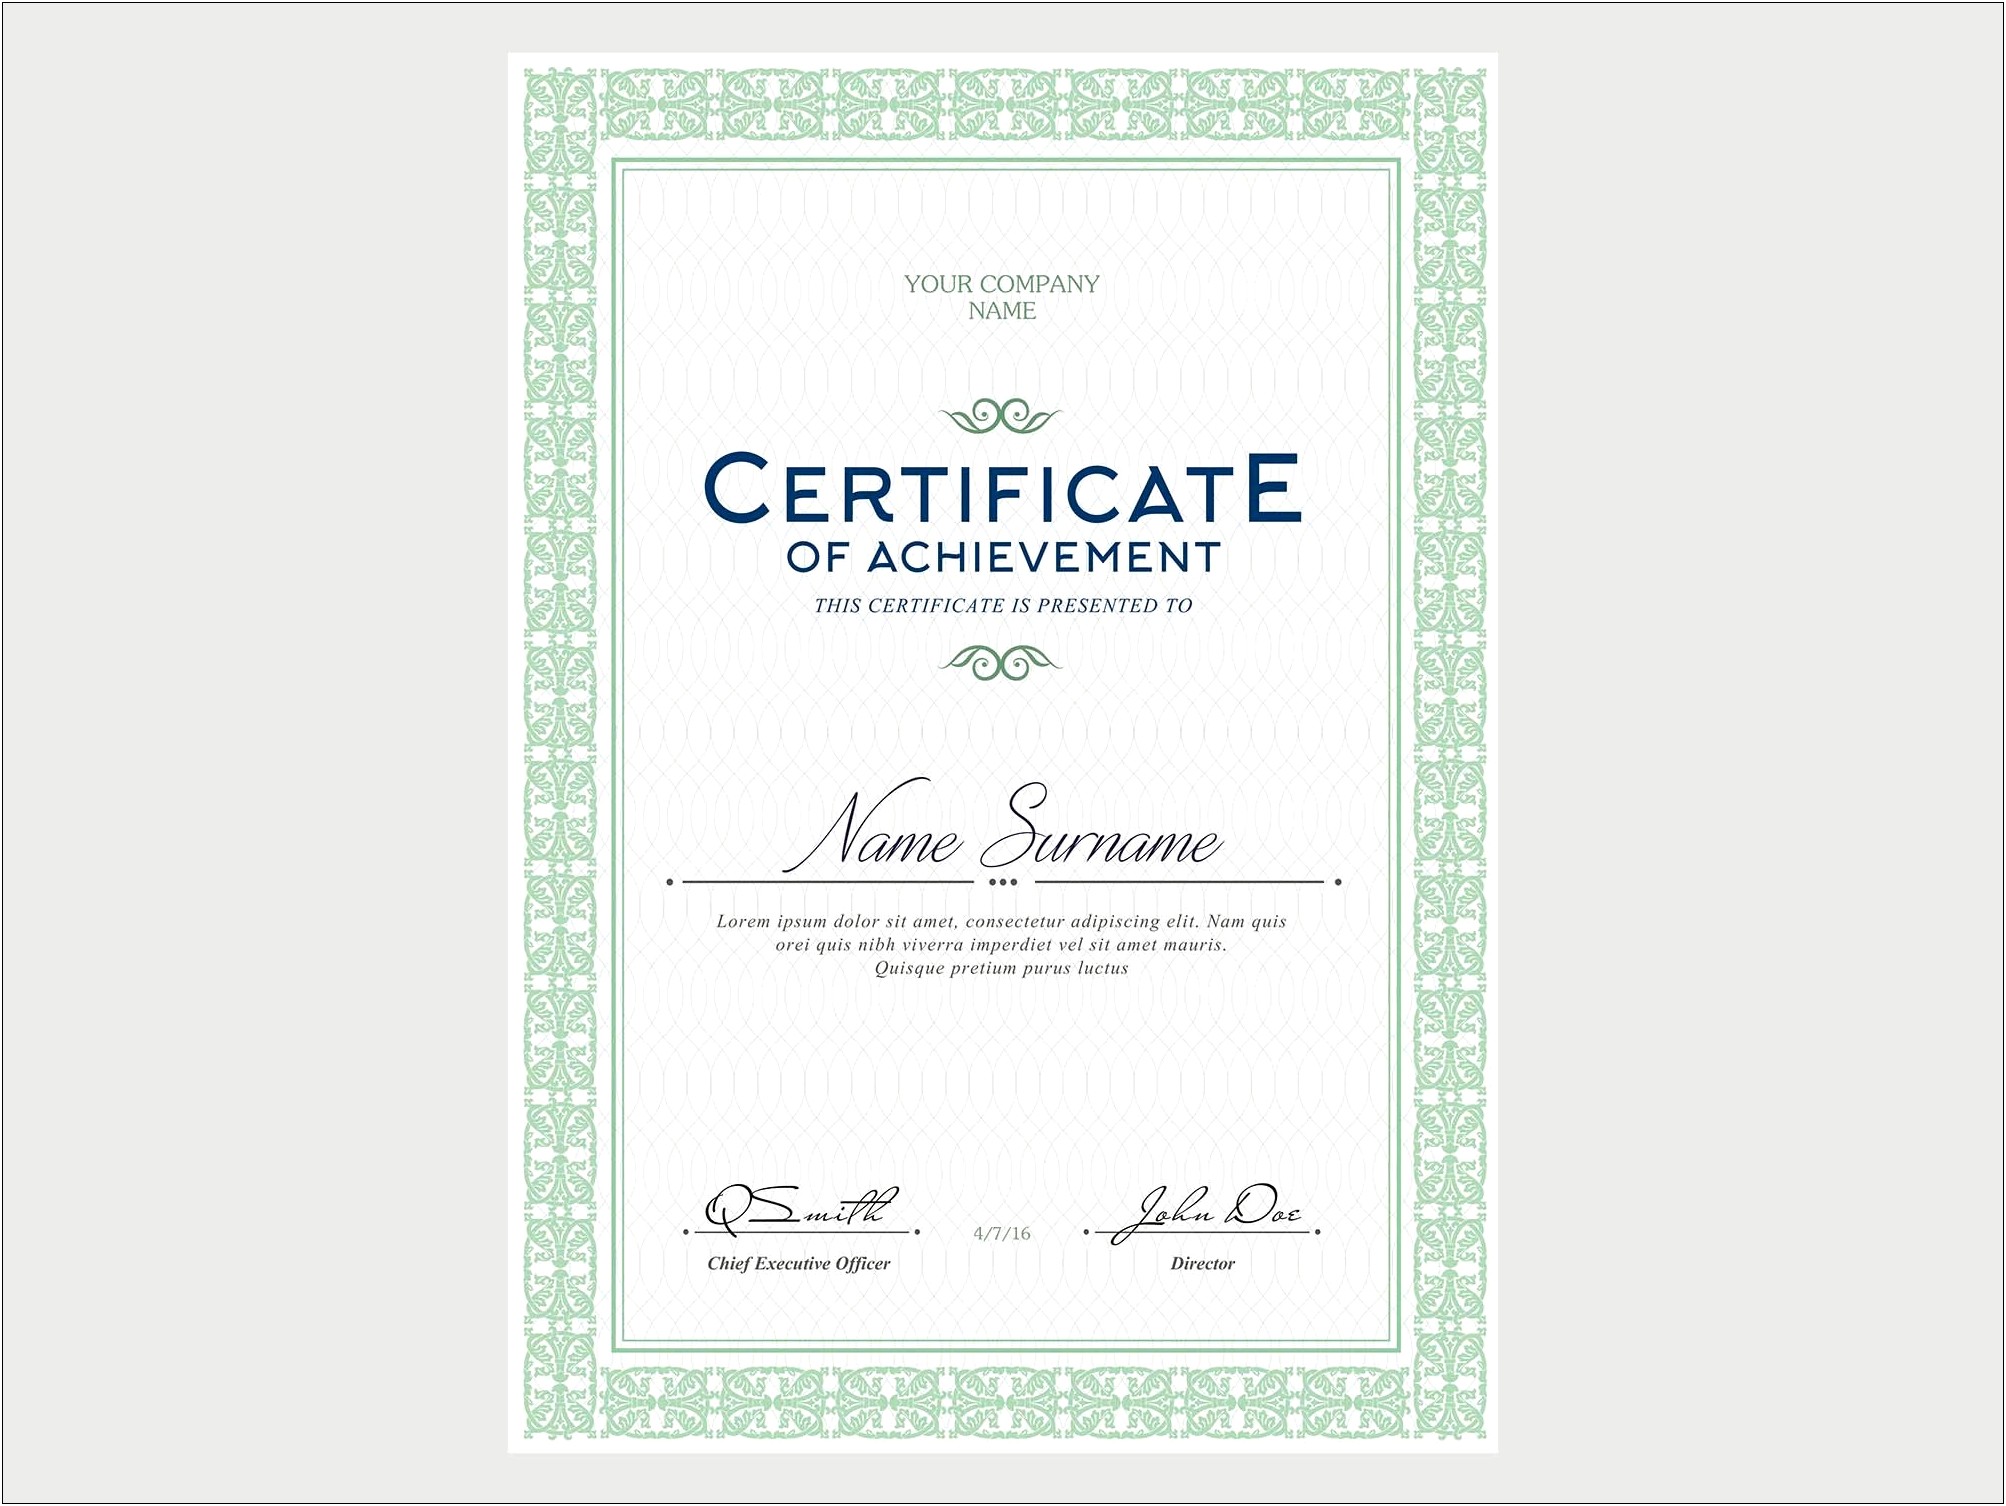 Blank Diploma Certificate Template Free Download